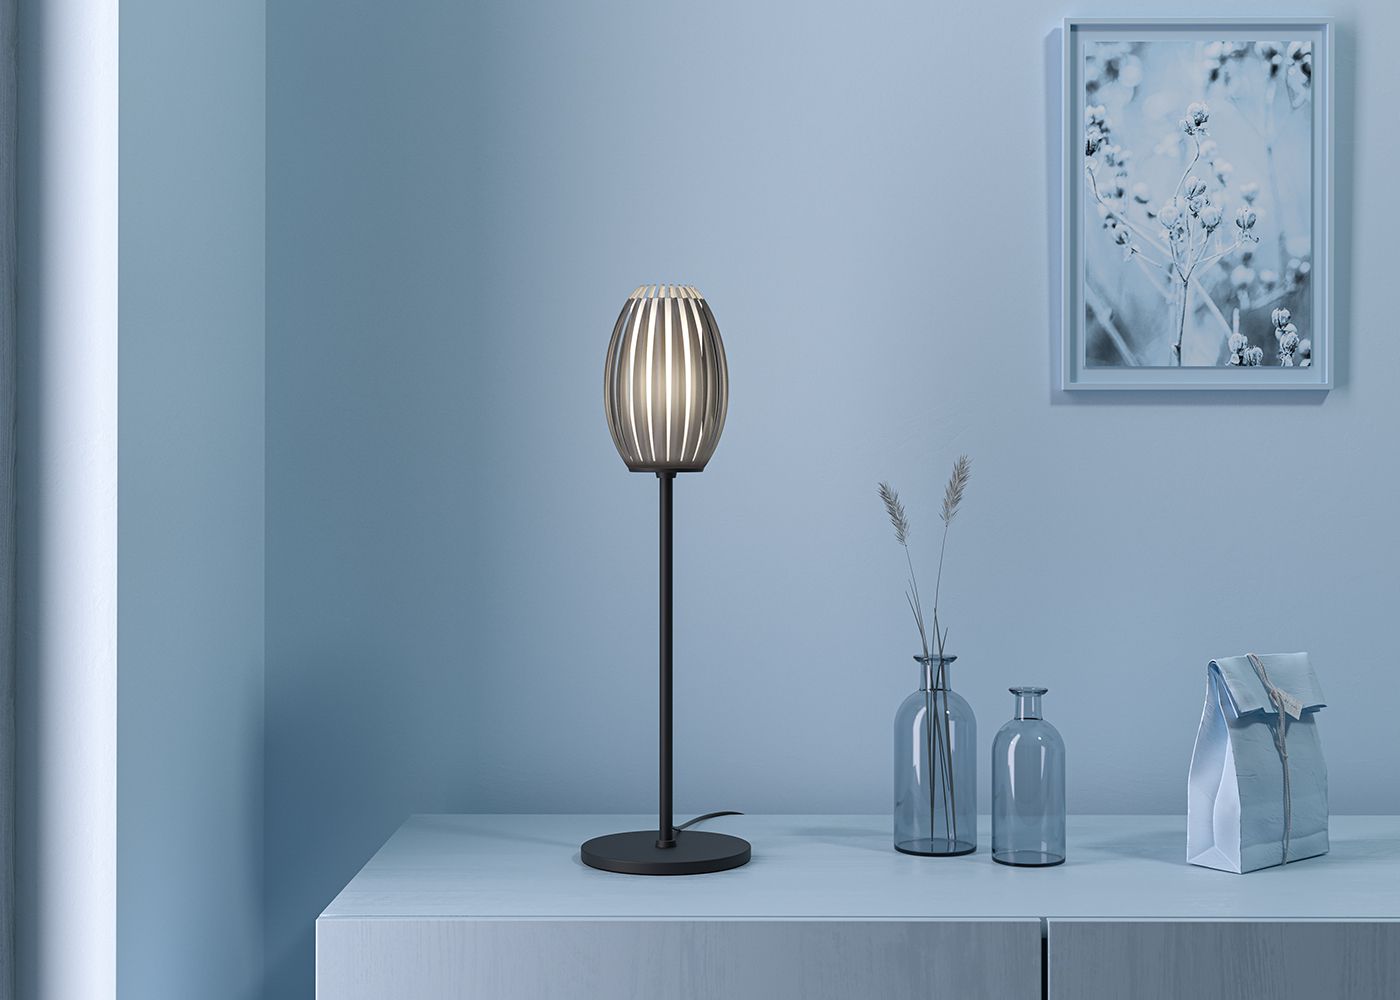 Table lamp on side table